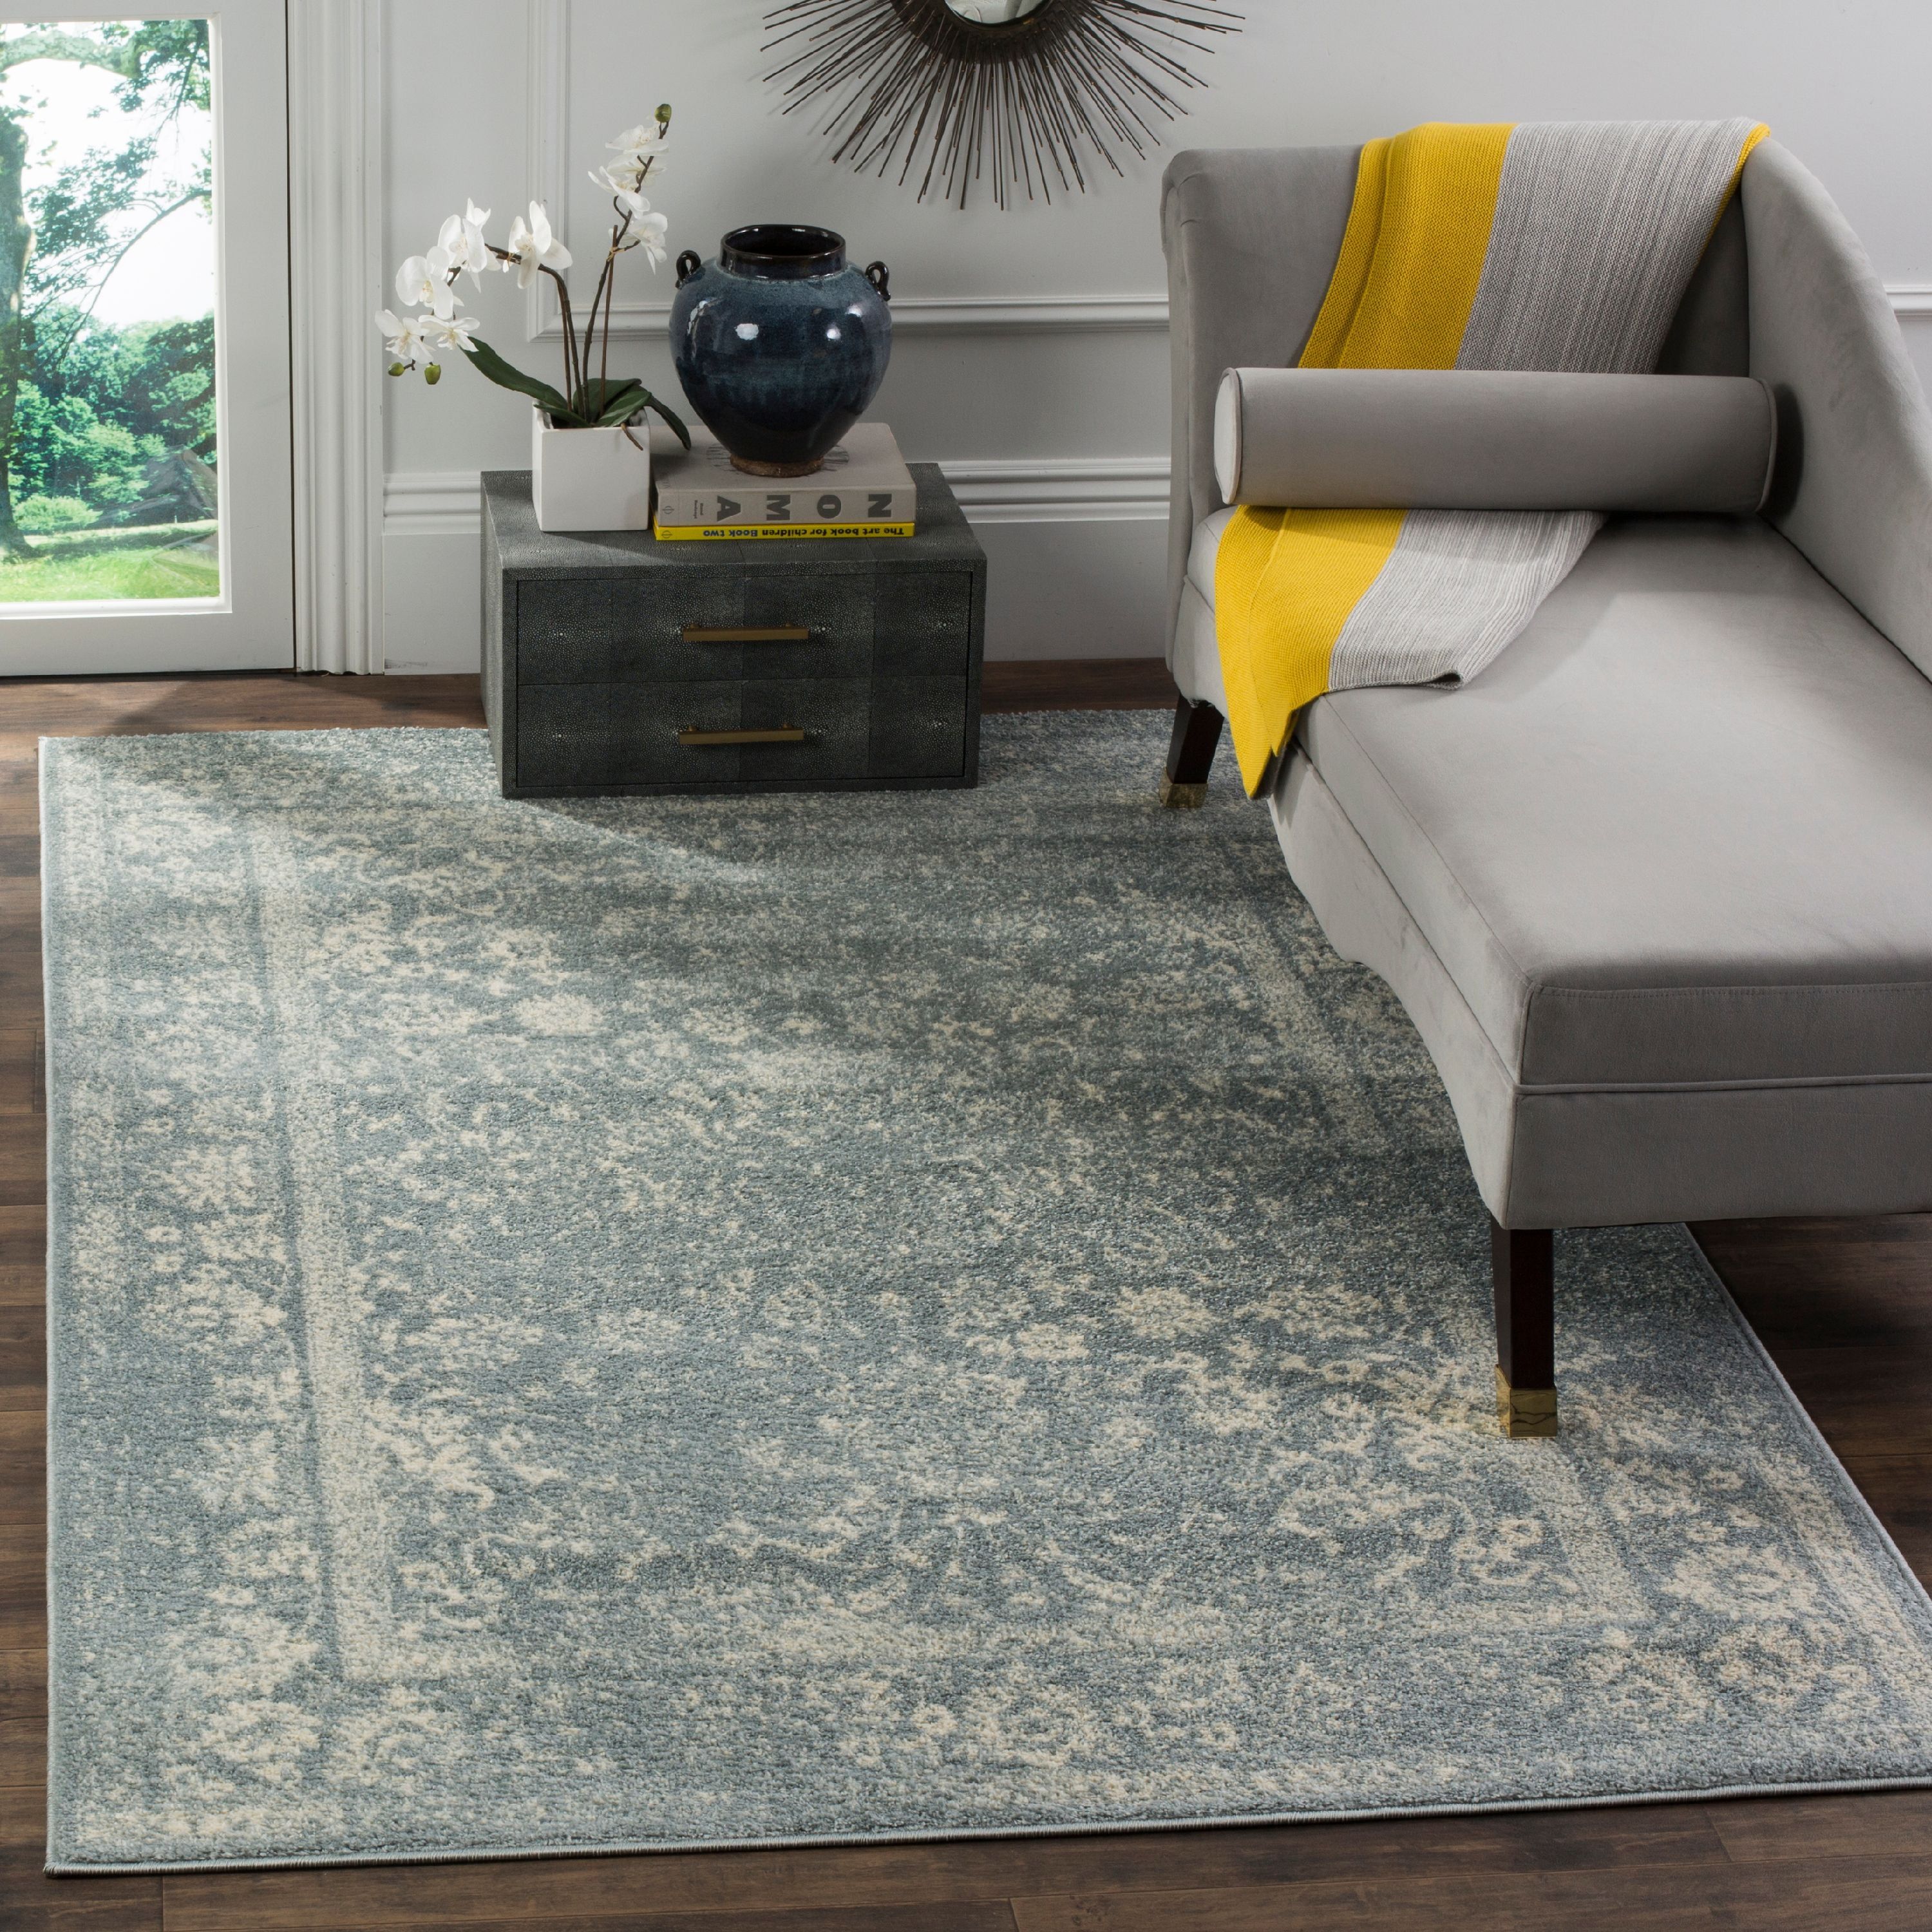 Slate & Ivory Medallion Easy-Care Synthetic Area Rug, 3' x 5'